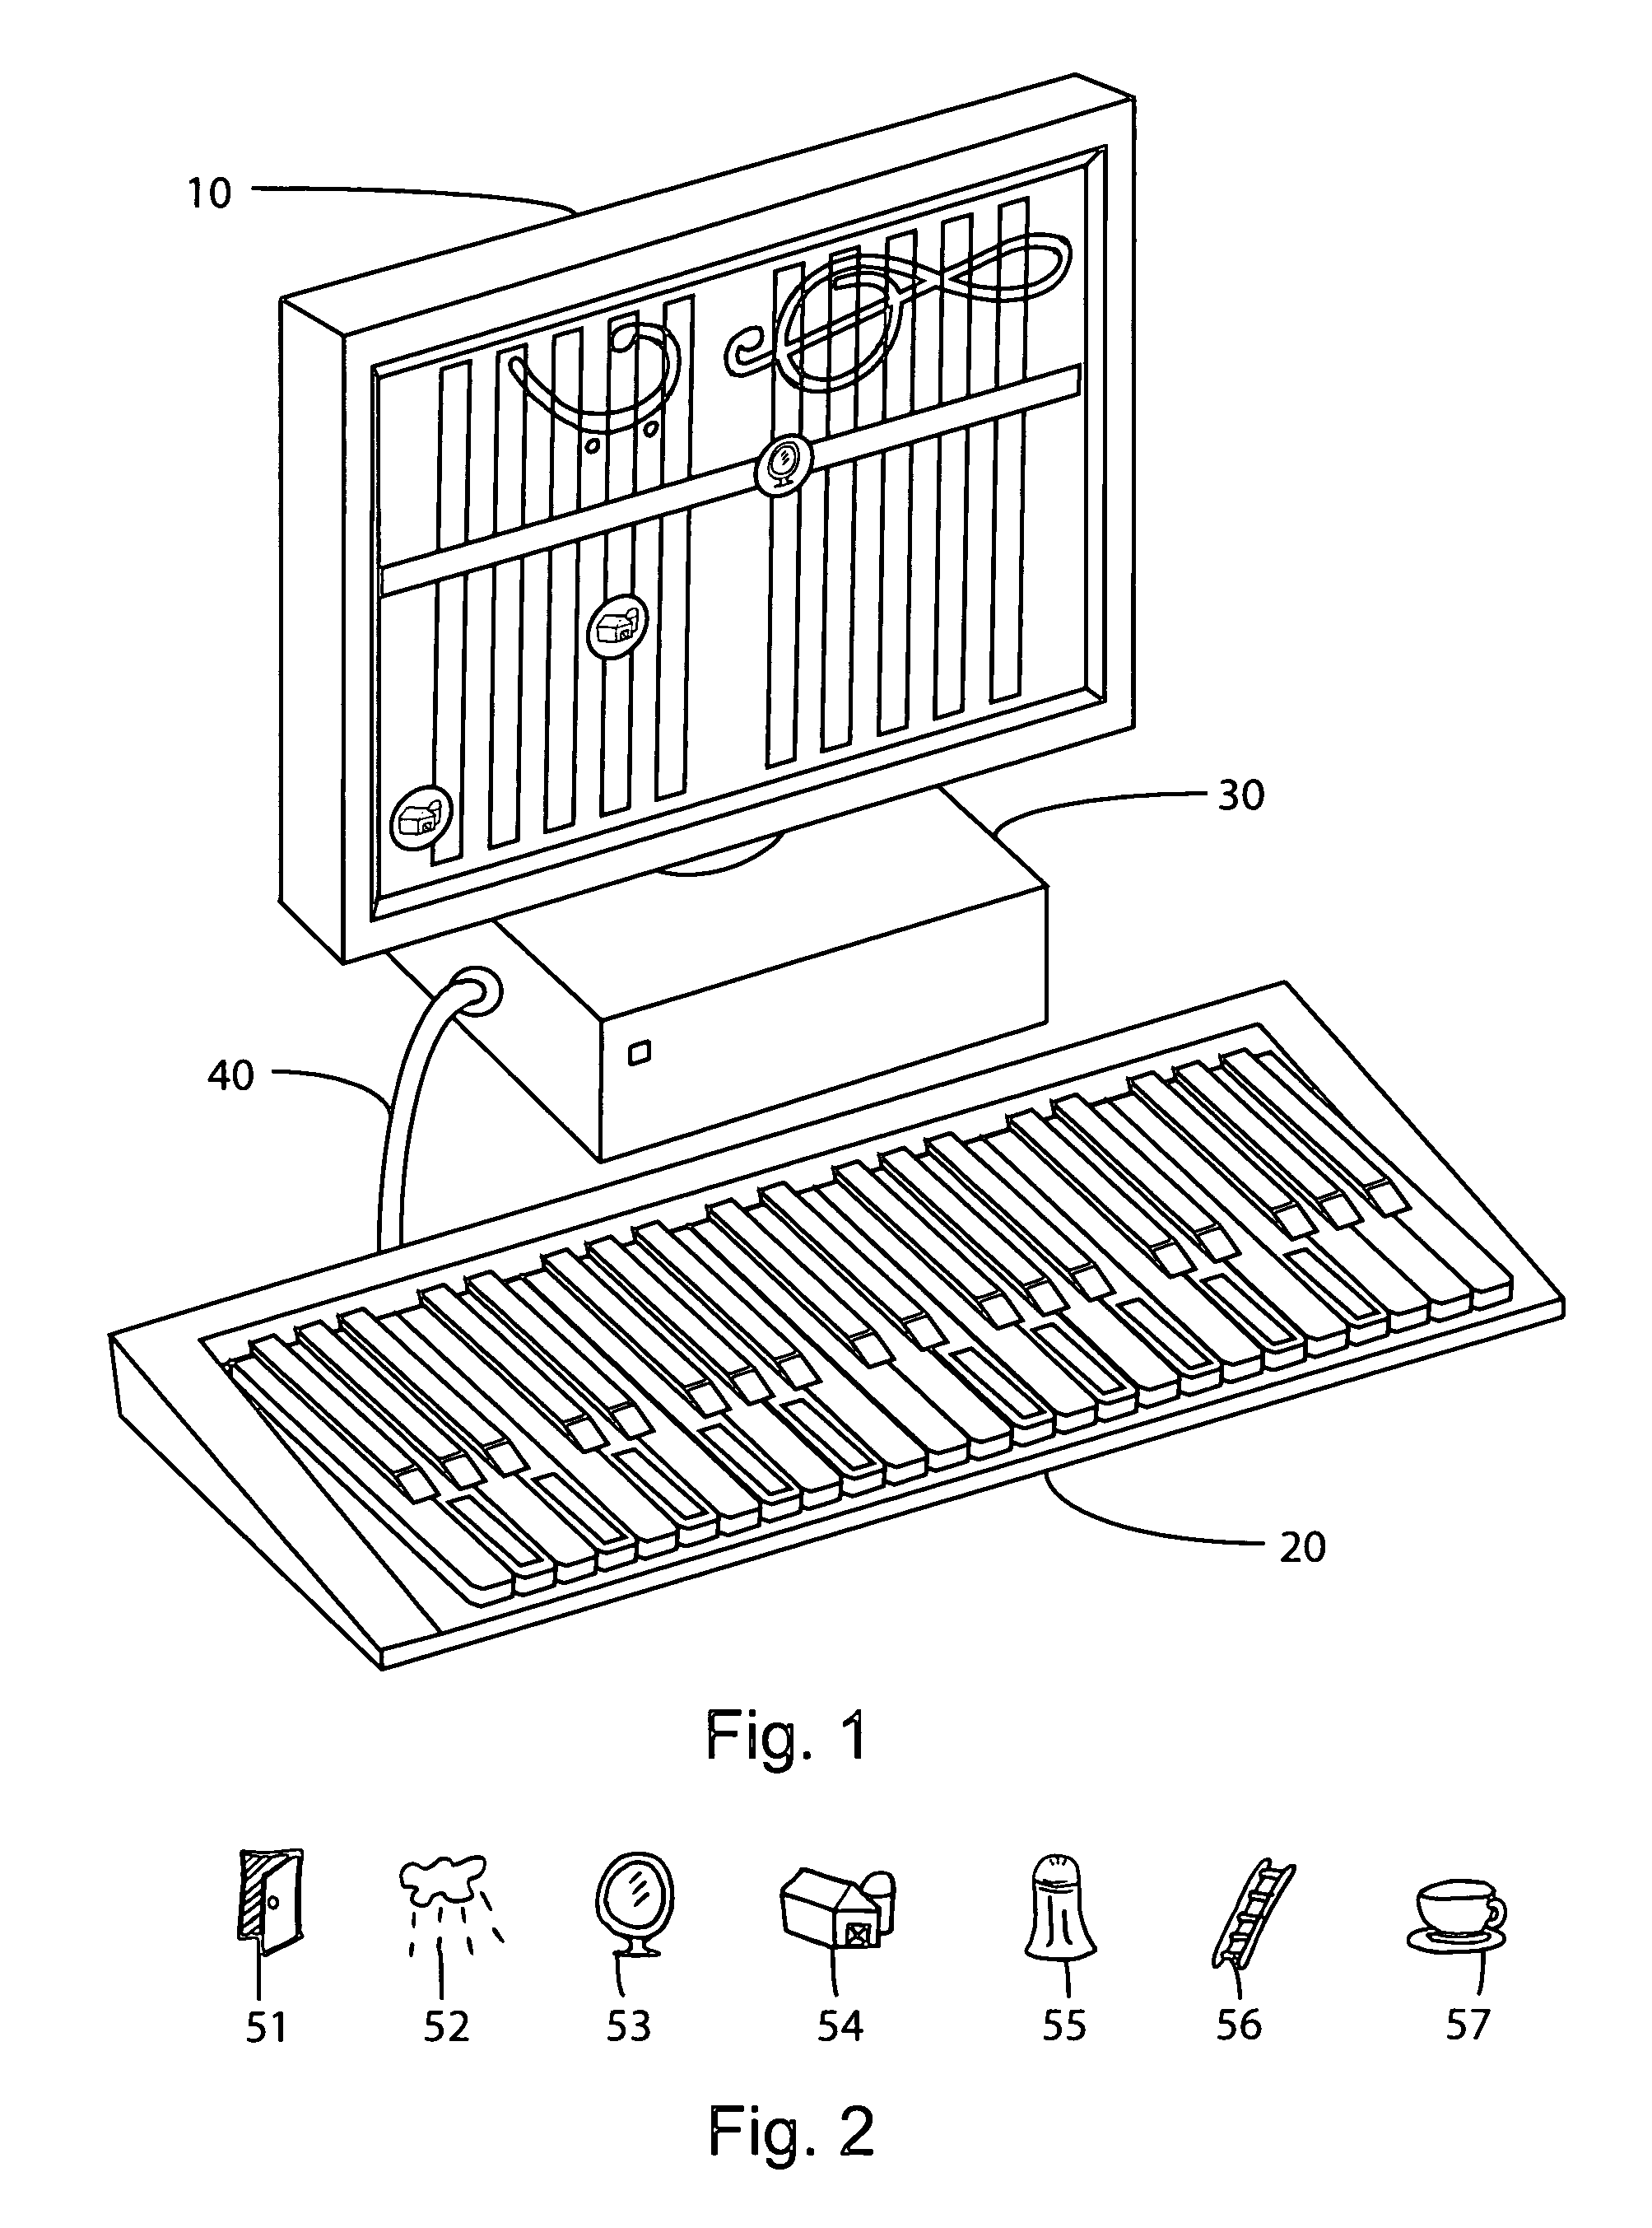 Machine and method for teaching music and piano